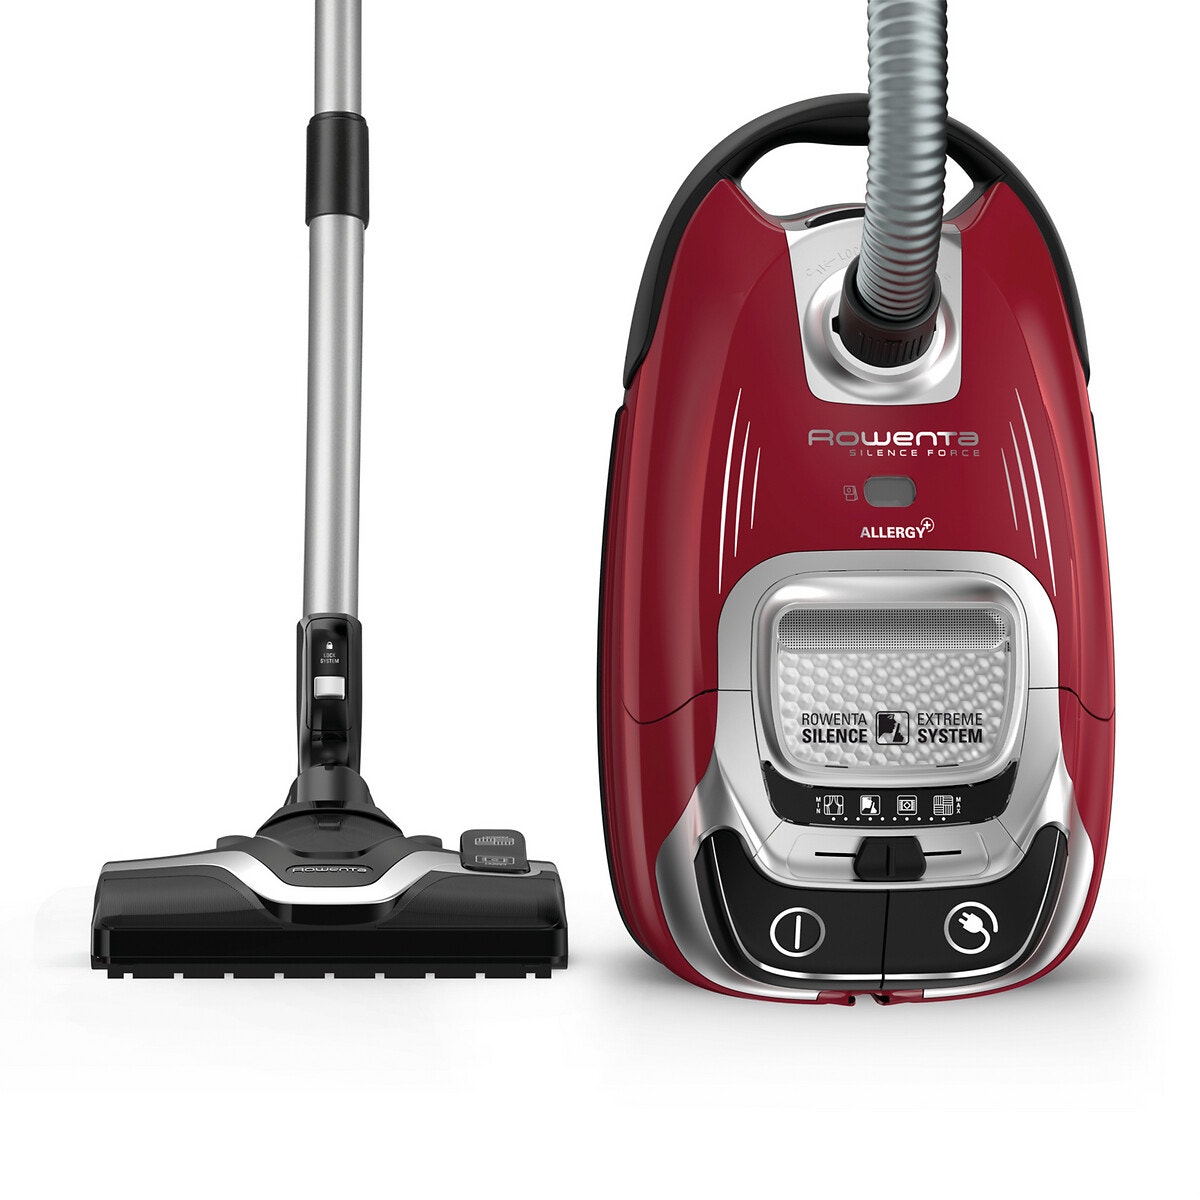 Aspirateur Rowenta Silence Force Compact Rouge